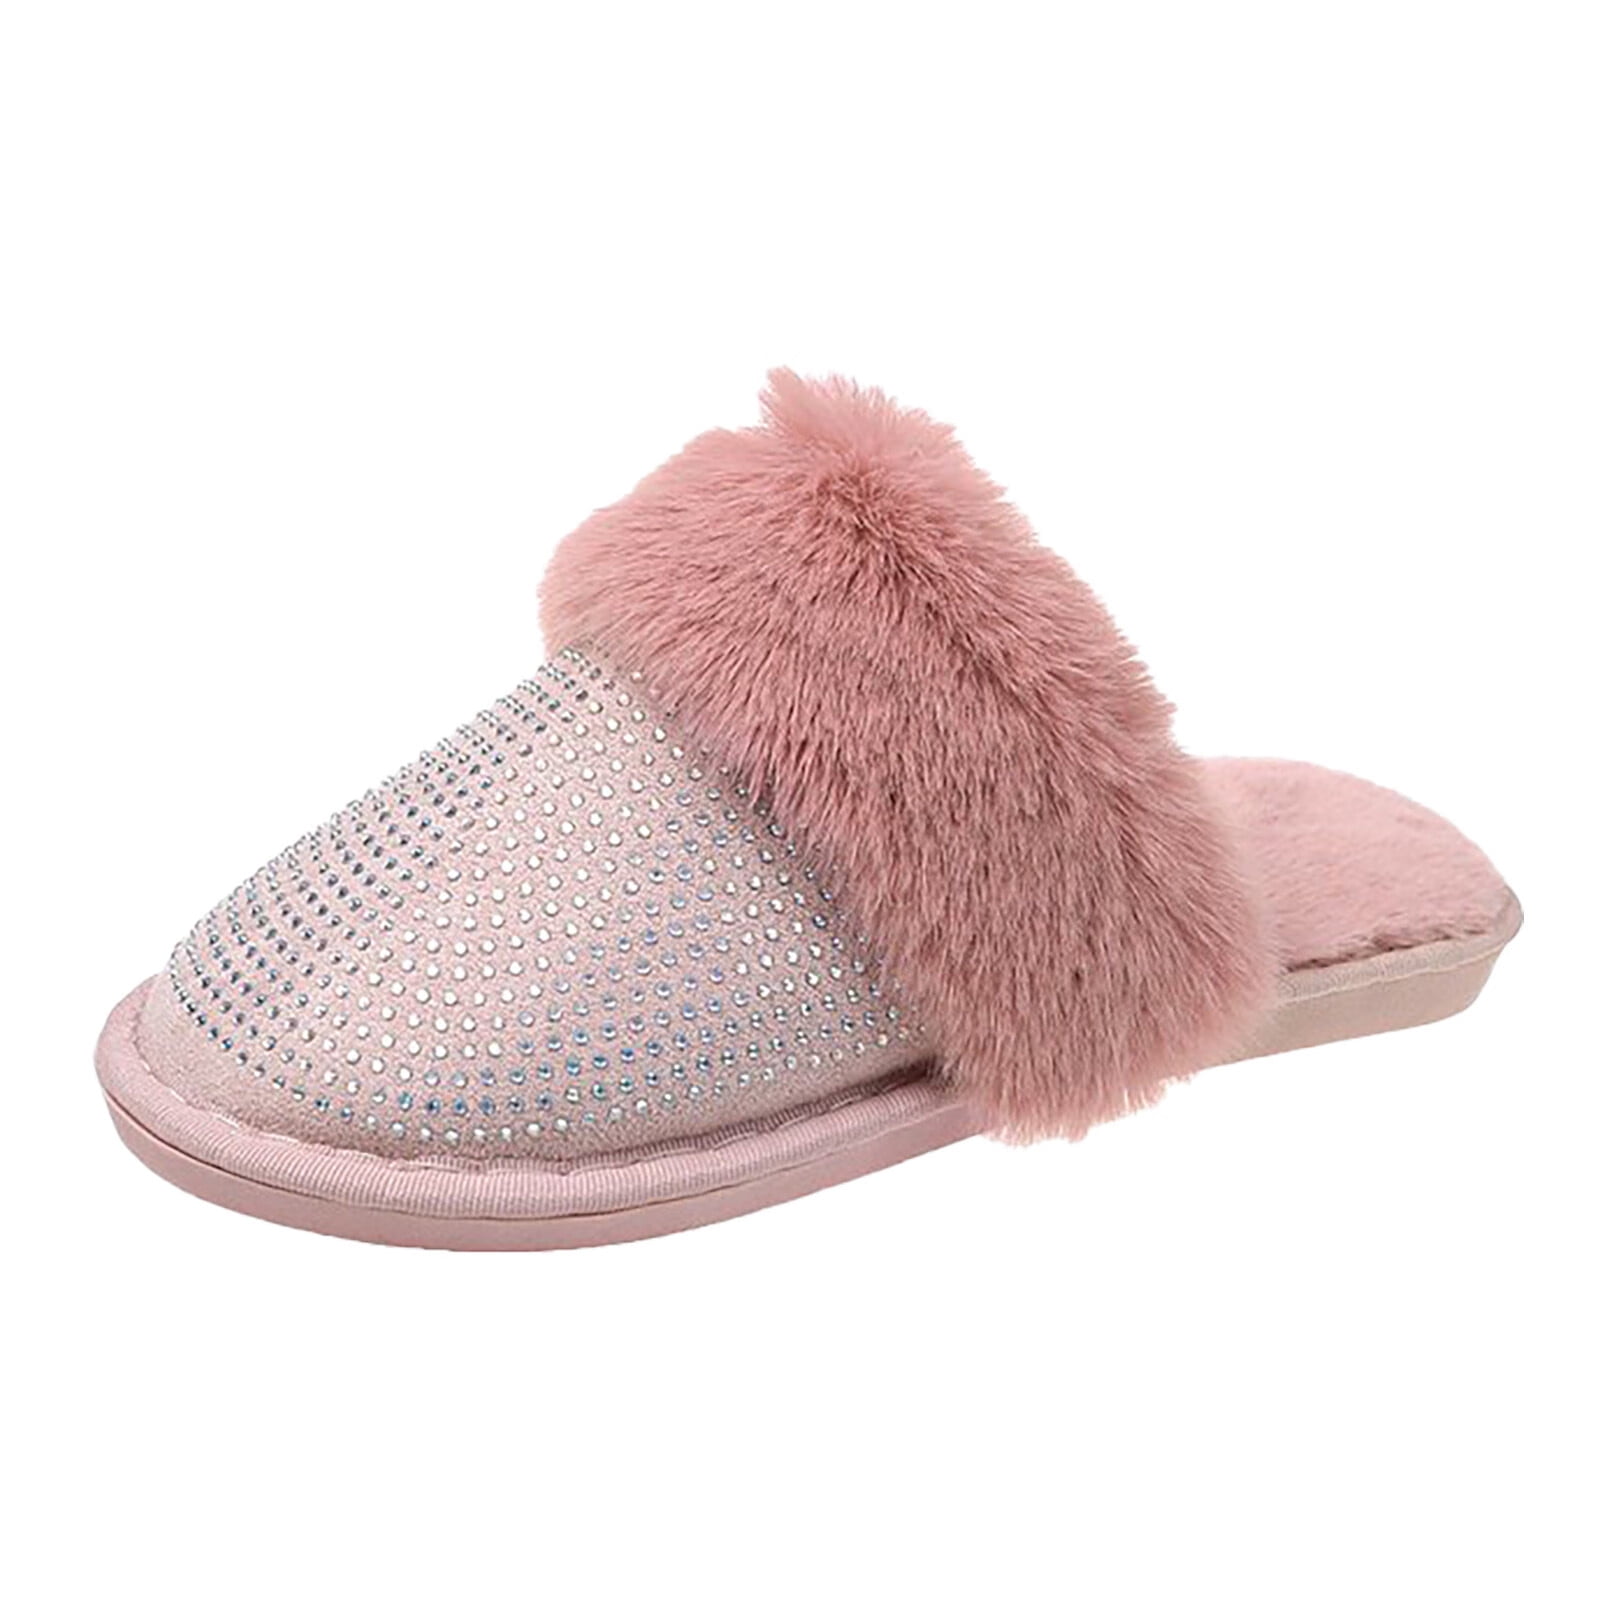 Rs 2200/- Cozy fur slippers for her New Arrivals. Available colors: Pink,Black,Grey,White  Available Sizes: 36, 37, 38, 39…